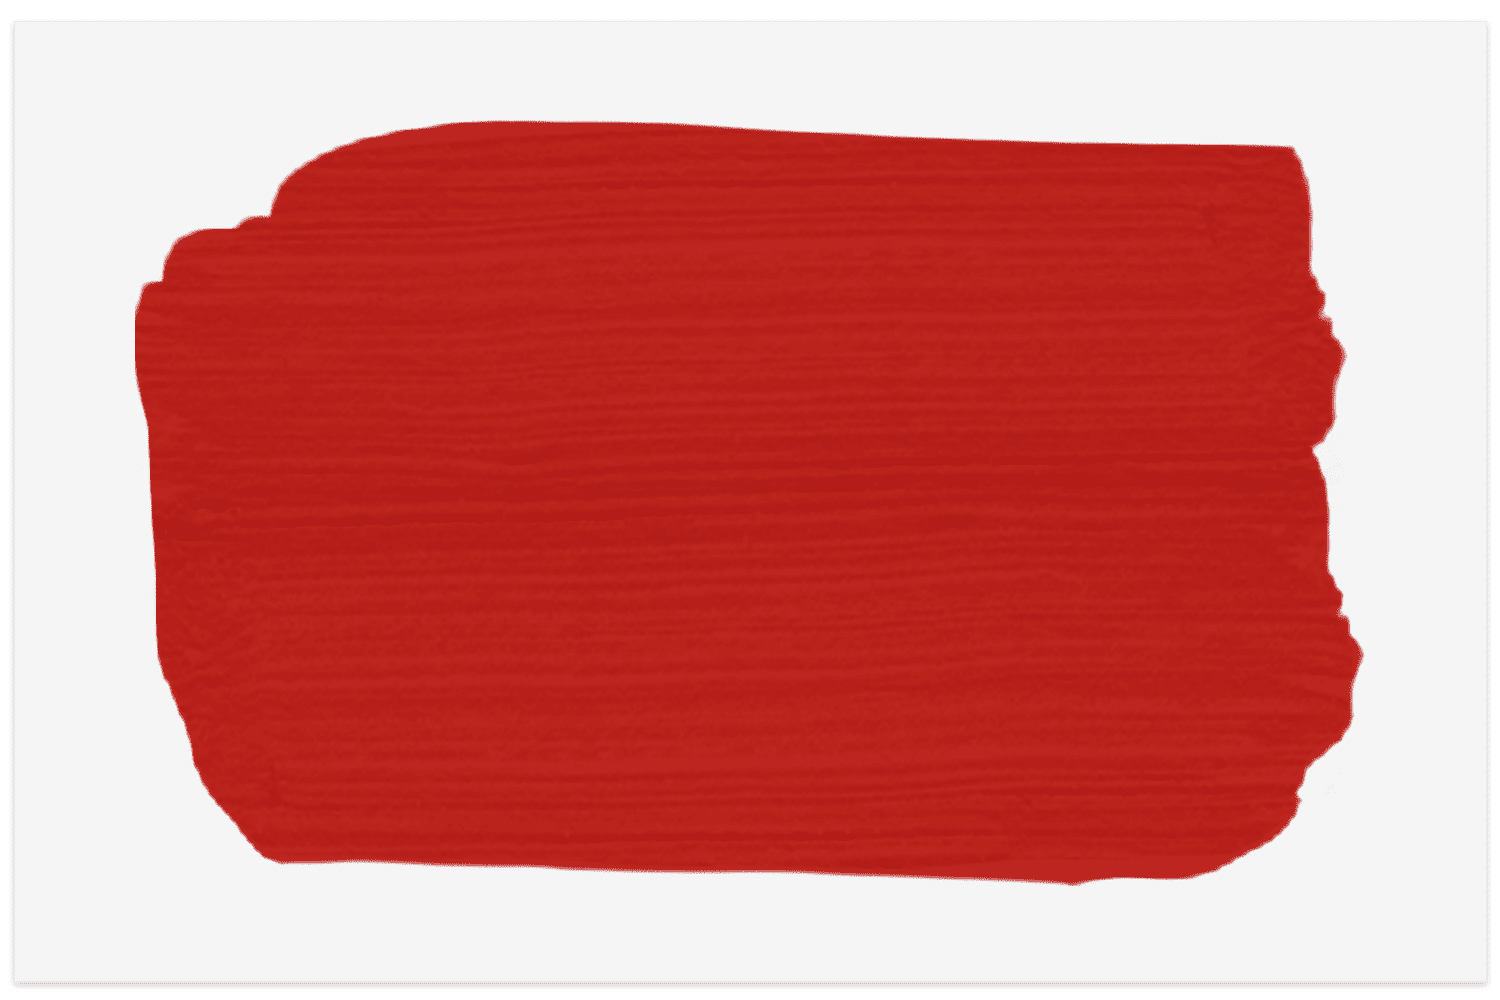 Swatch of Atomic Red by Little Greene